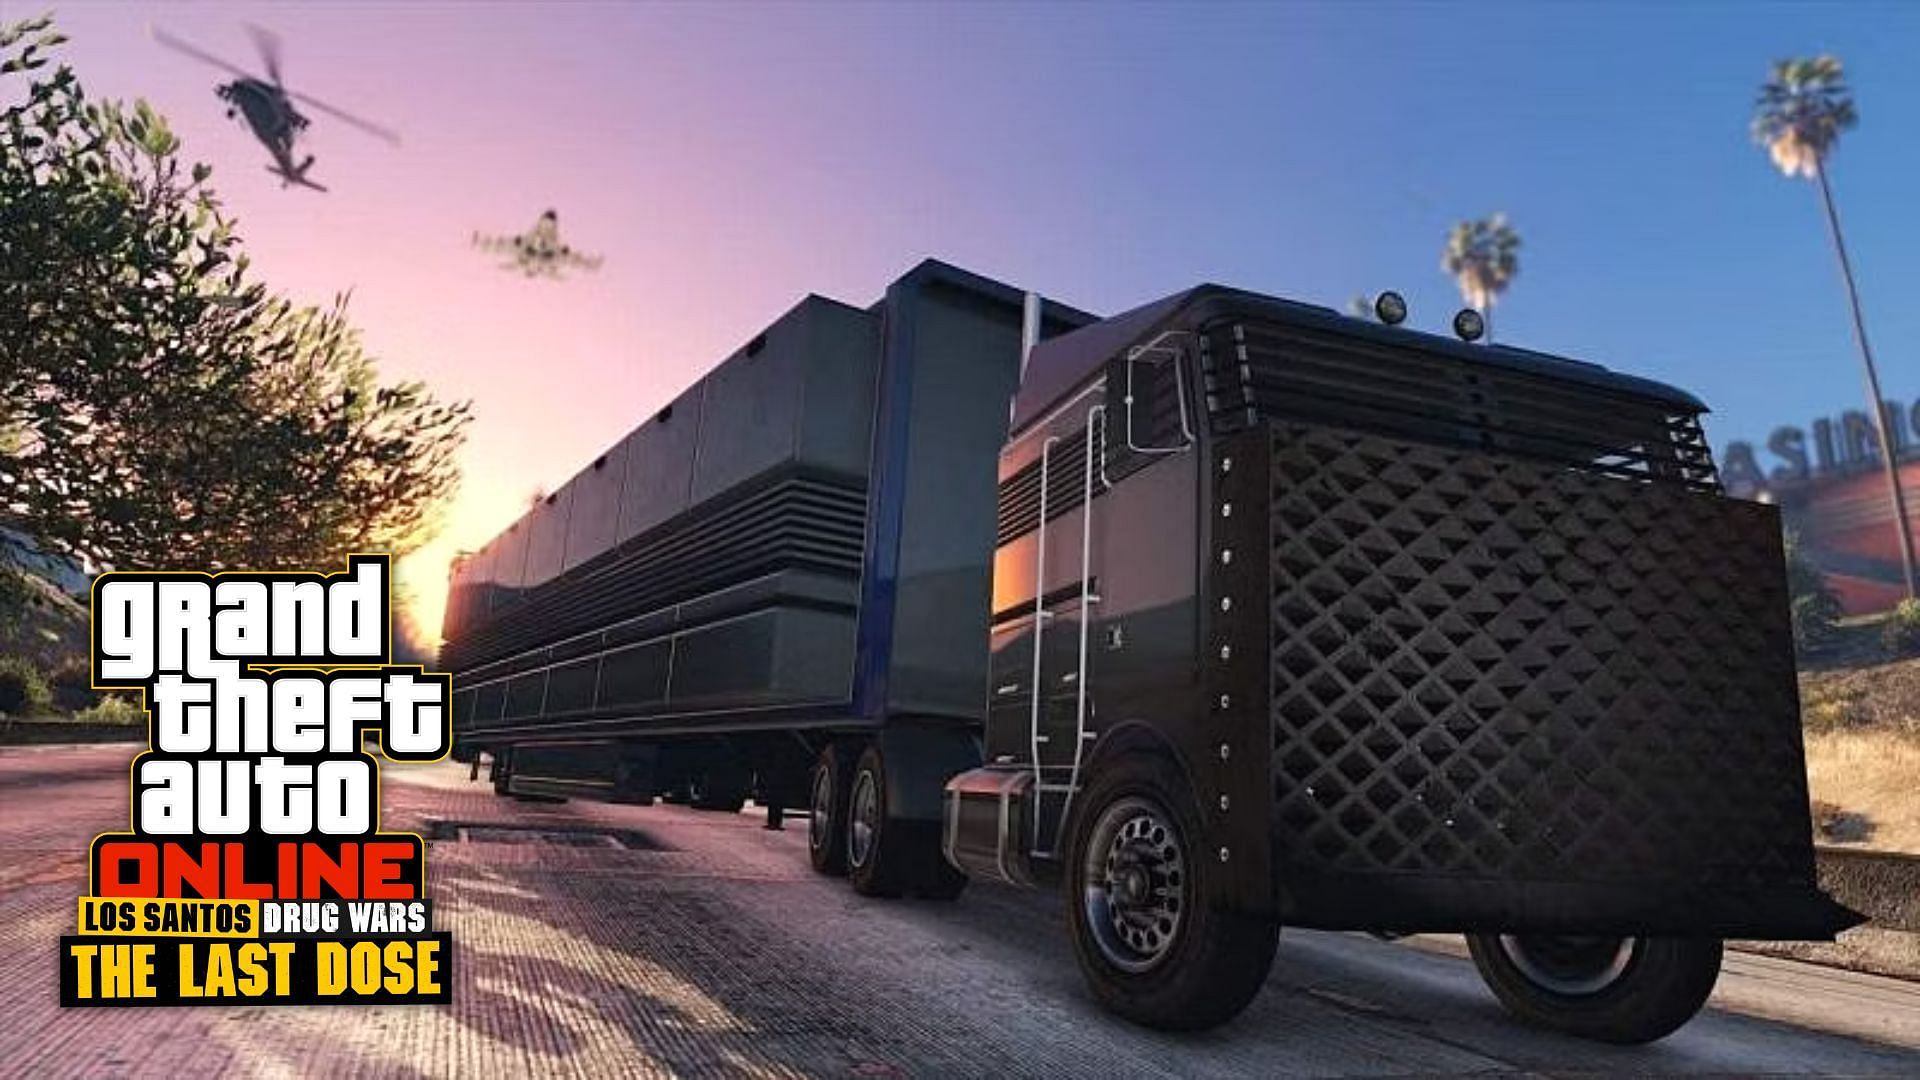 A brief about the Mobile Operations Center (MOC) and its functions in GTA Online after the Los Santos Drug Wars update (Image via Rockstar Games)